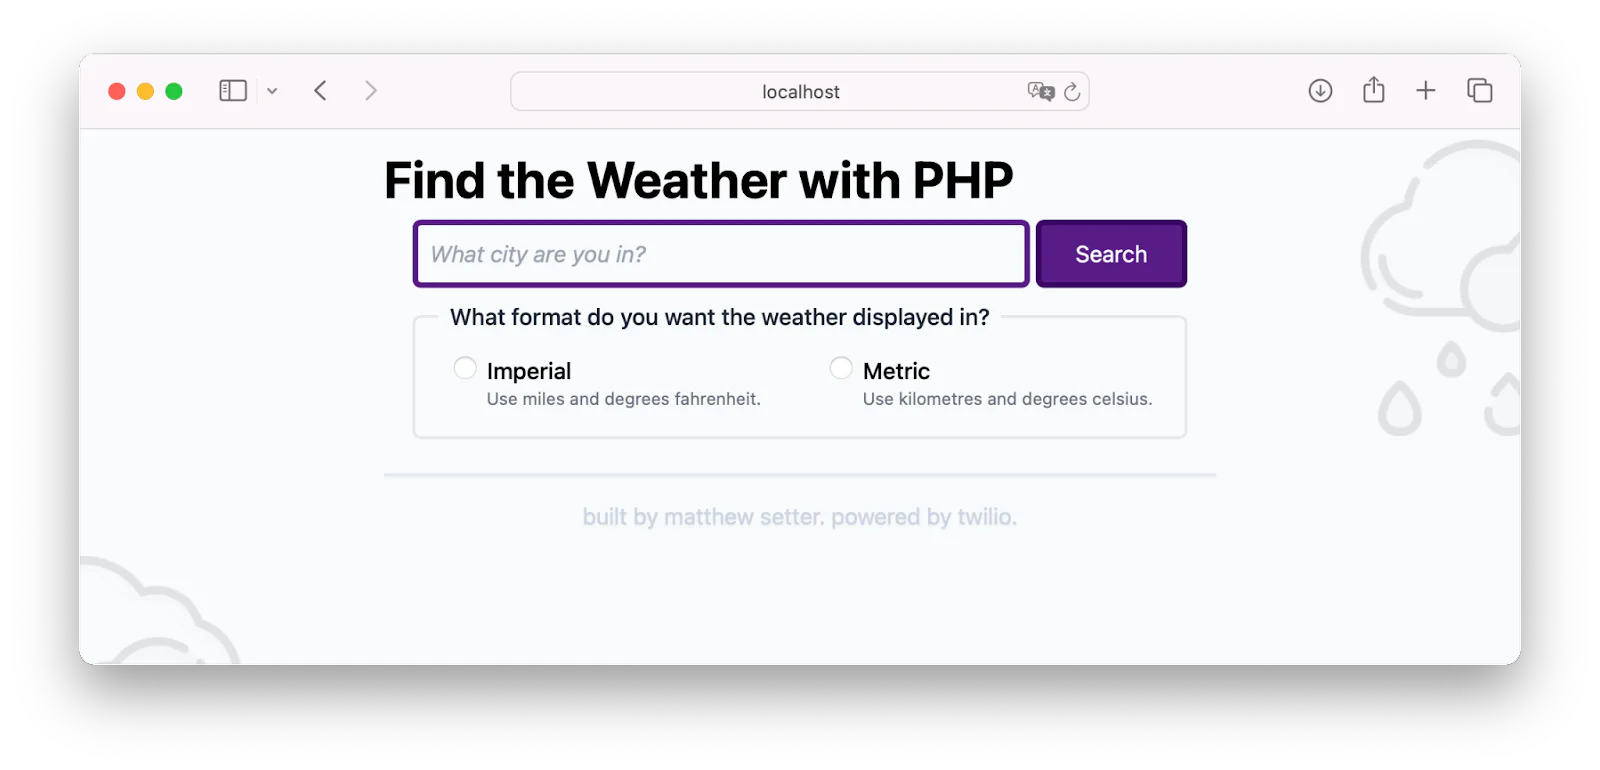 The default page of the PHP weather application rendered in the Safari web browser. It has a field to enter a city name to find the weather for at the top of the page, and a radio button for choosing either imperial or metric as the unit of measurement for the weather data.